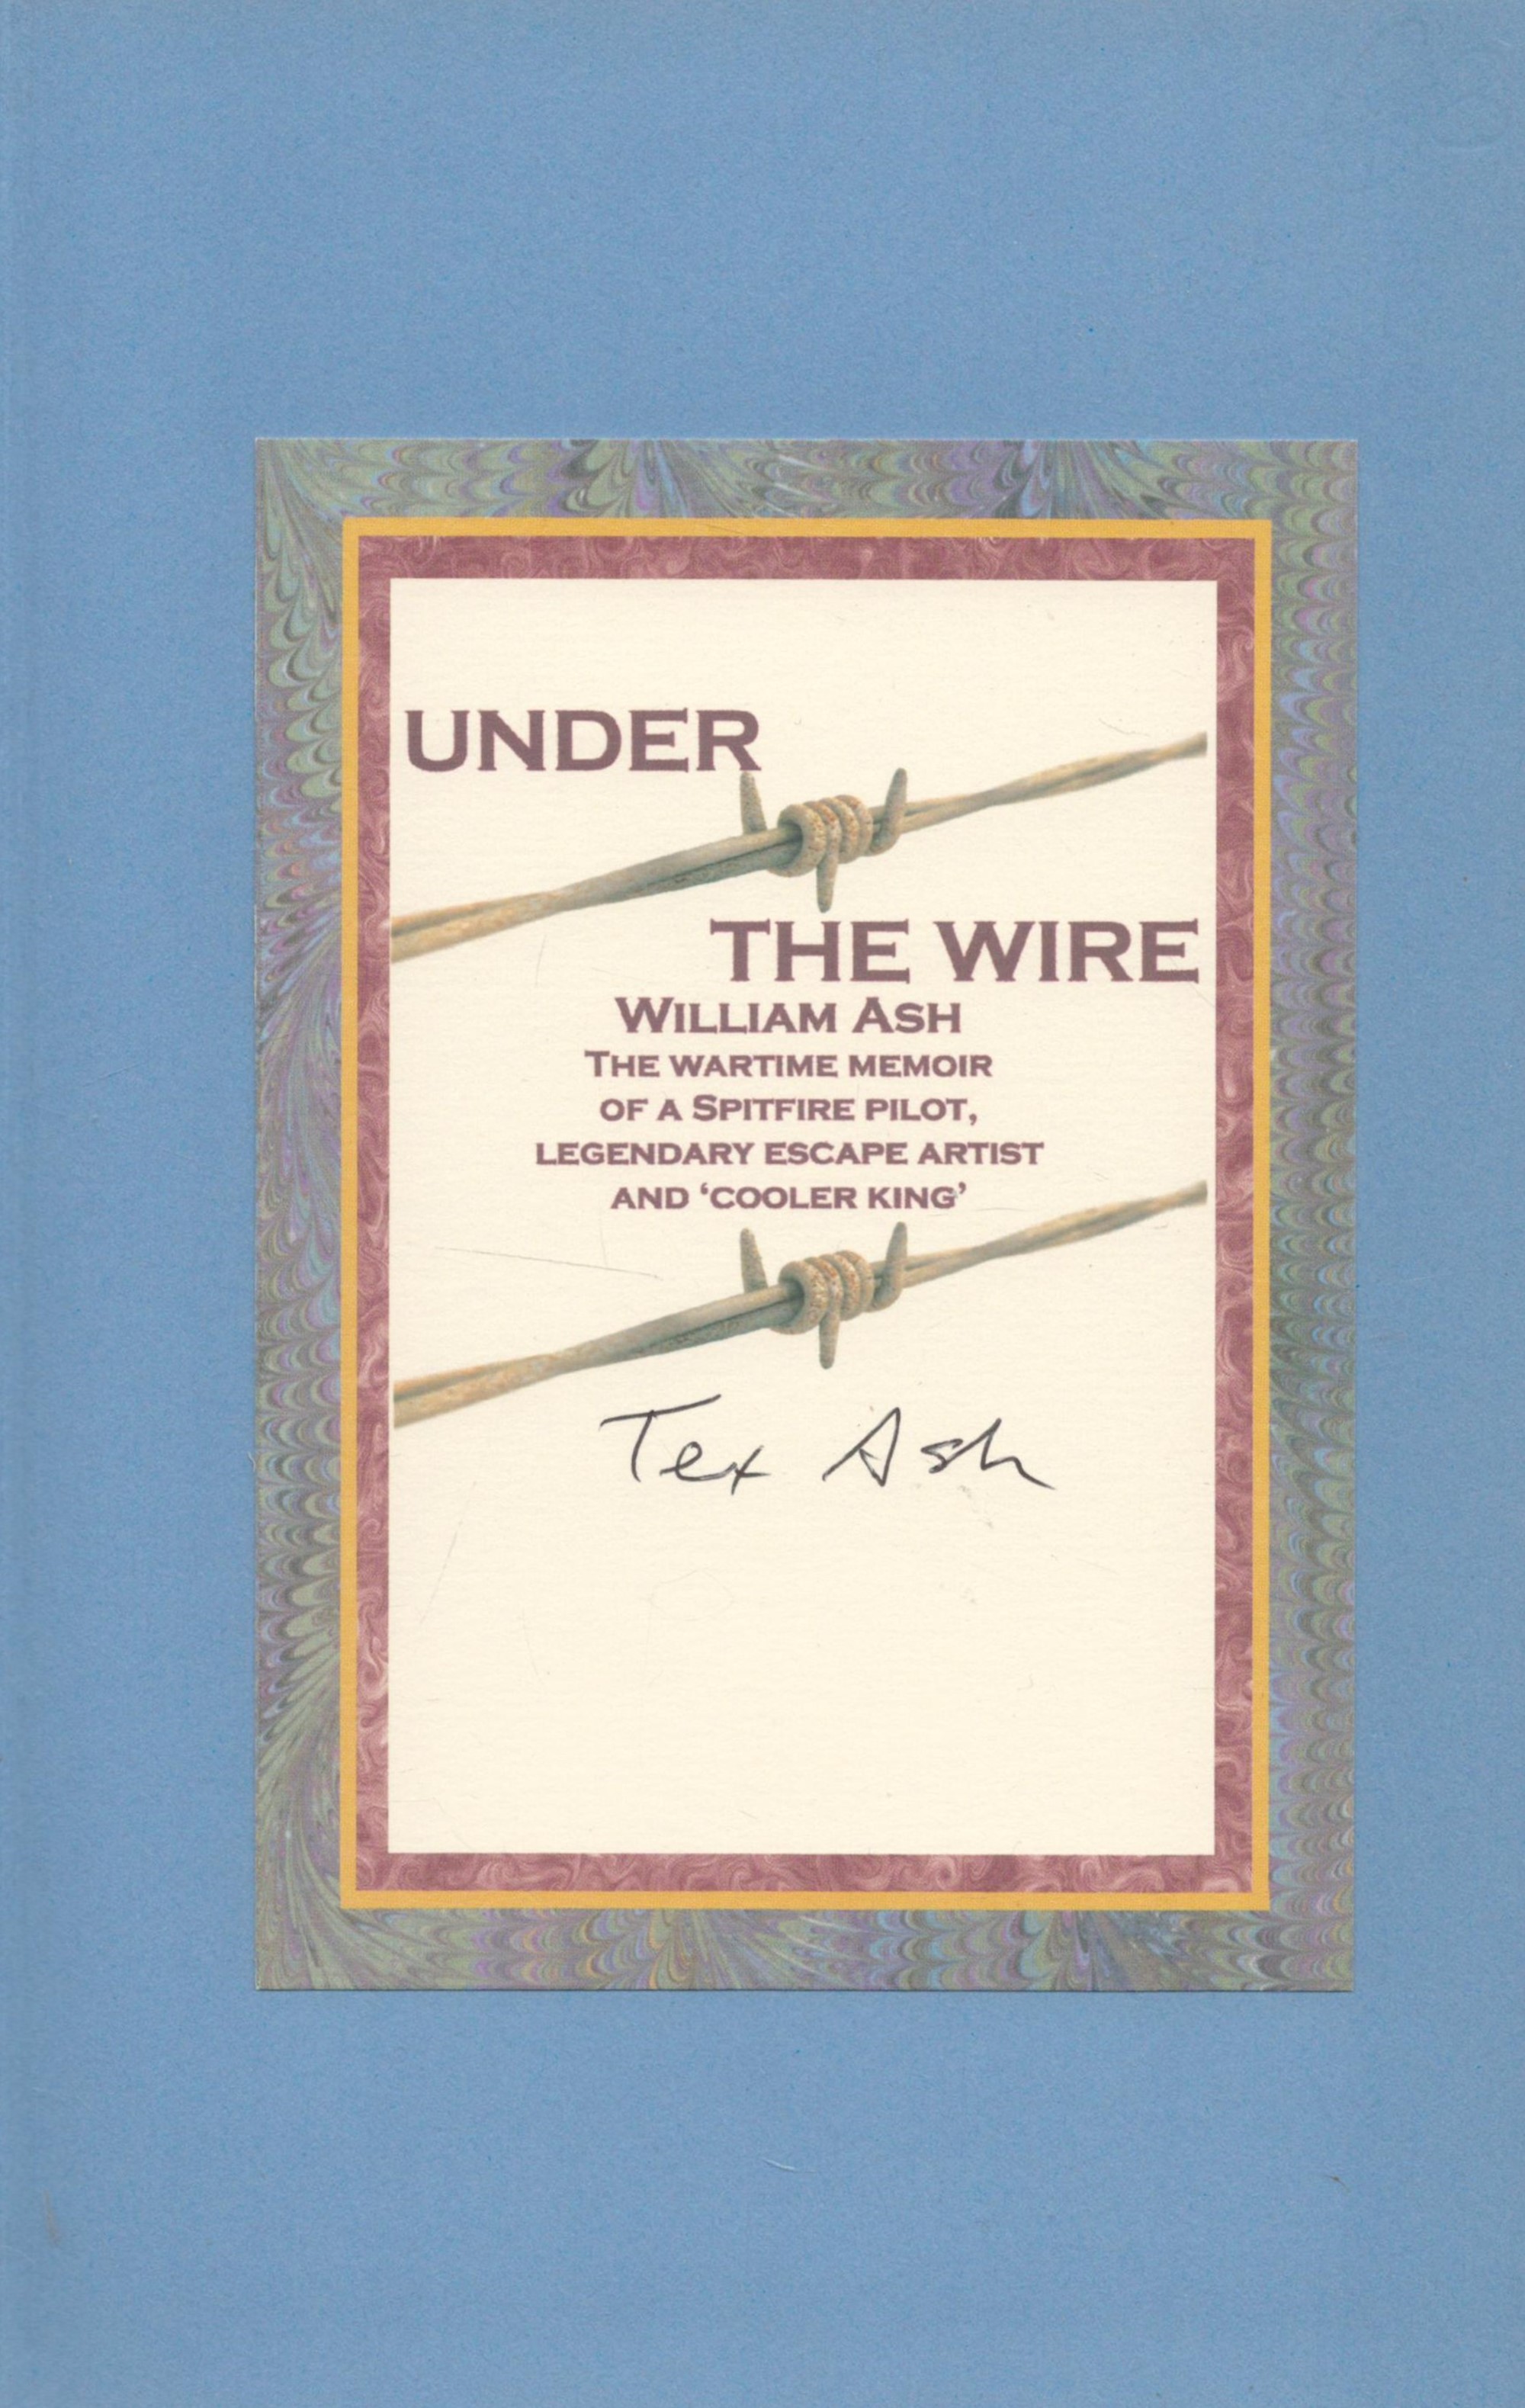 WW2 Flt Lt William Tex Ash Signed 1st Ed Hardback Book Titled Under the Wire by Tex Ash. Signed on a - Image 2 of 4